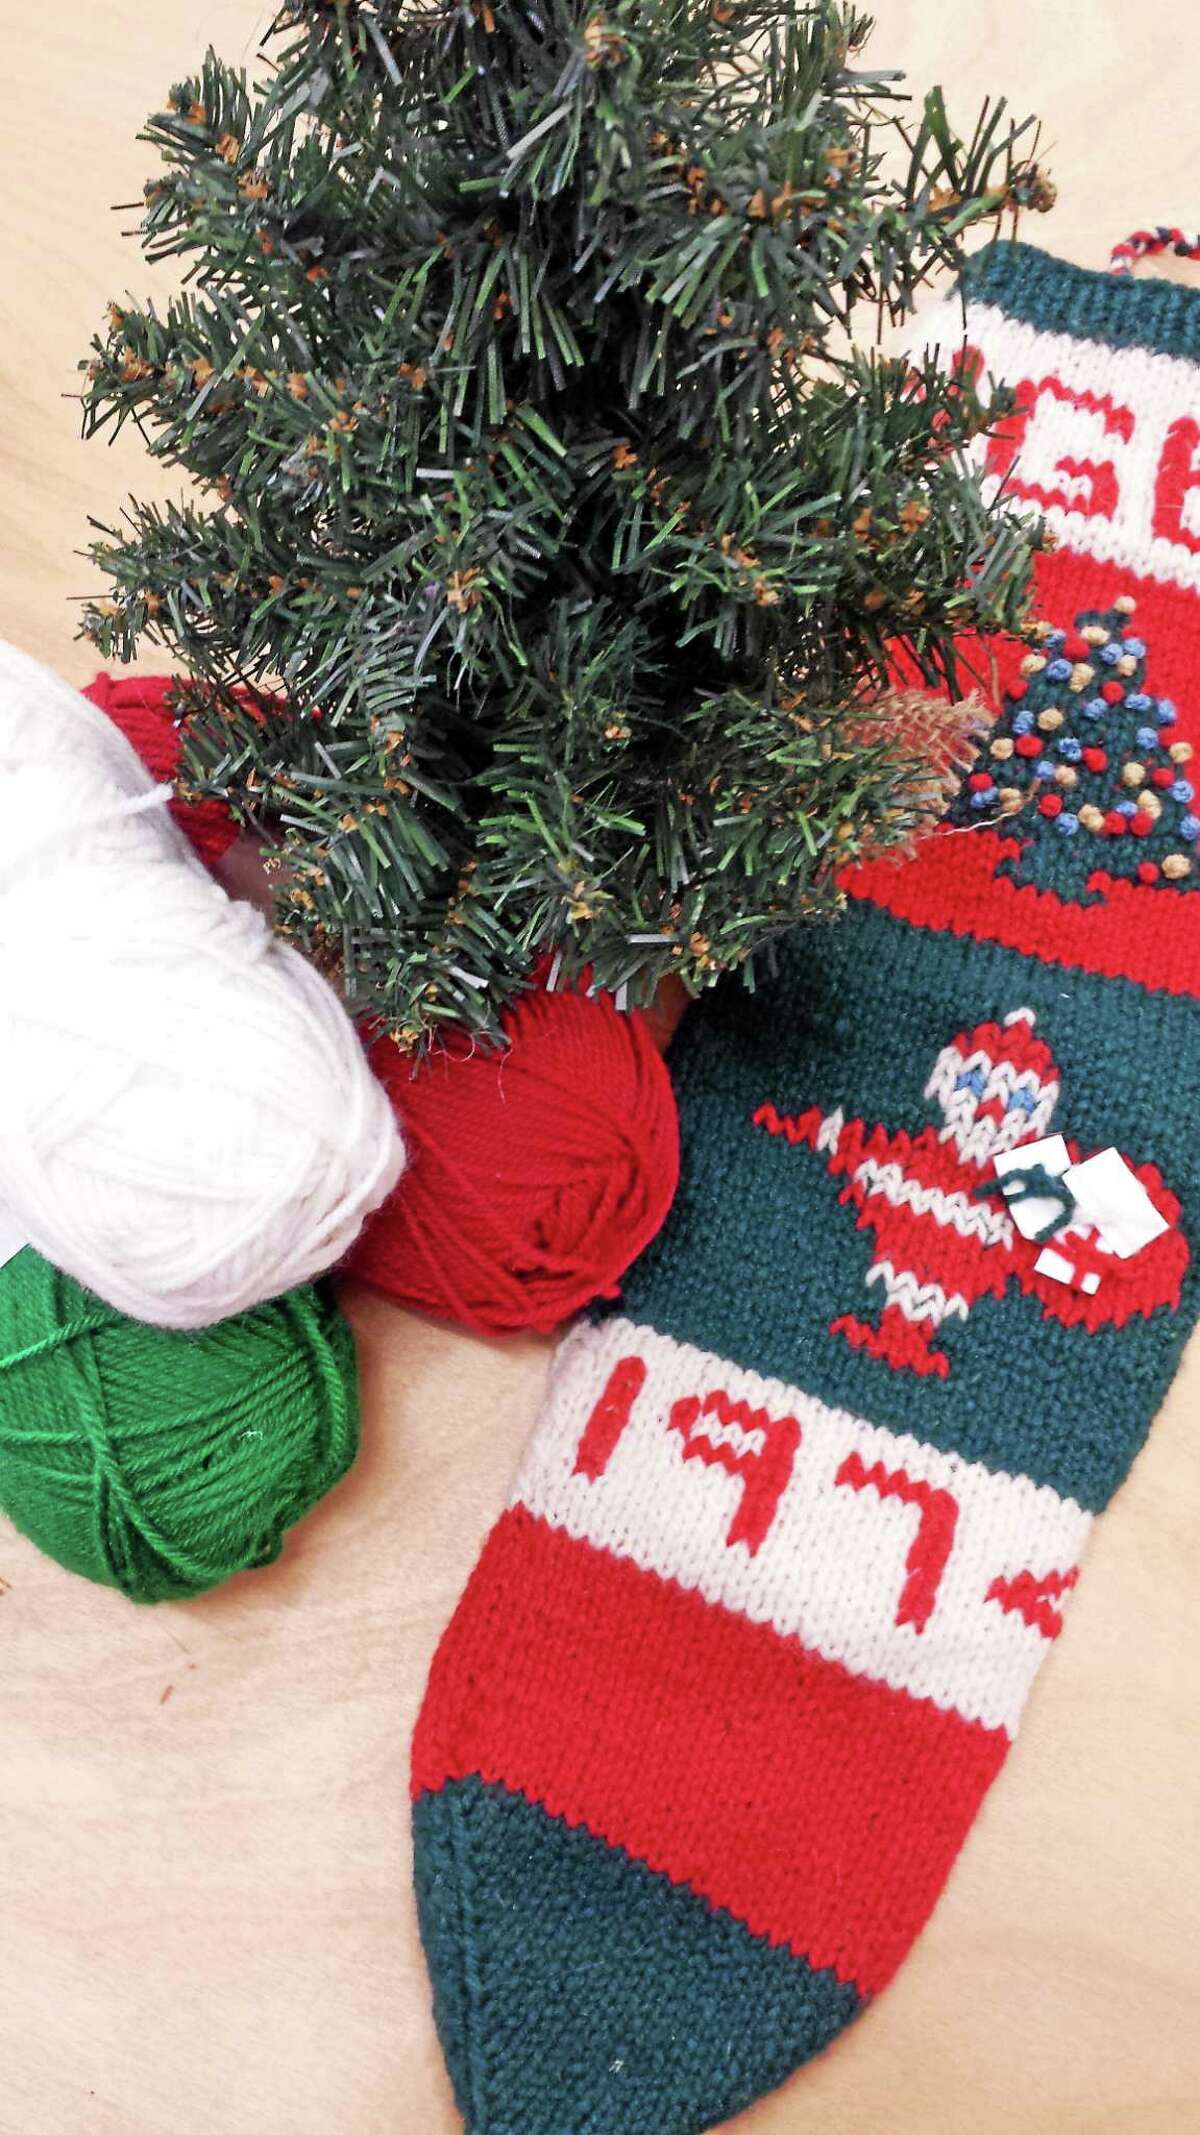 Submitted photo - Ginger Balch The last-minute projects, such as a holiday stocking for that special stocking, often mean the most to a dedicated knitter.